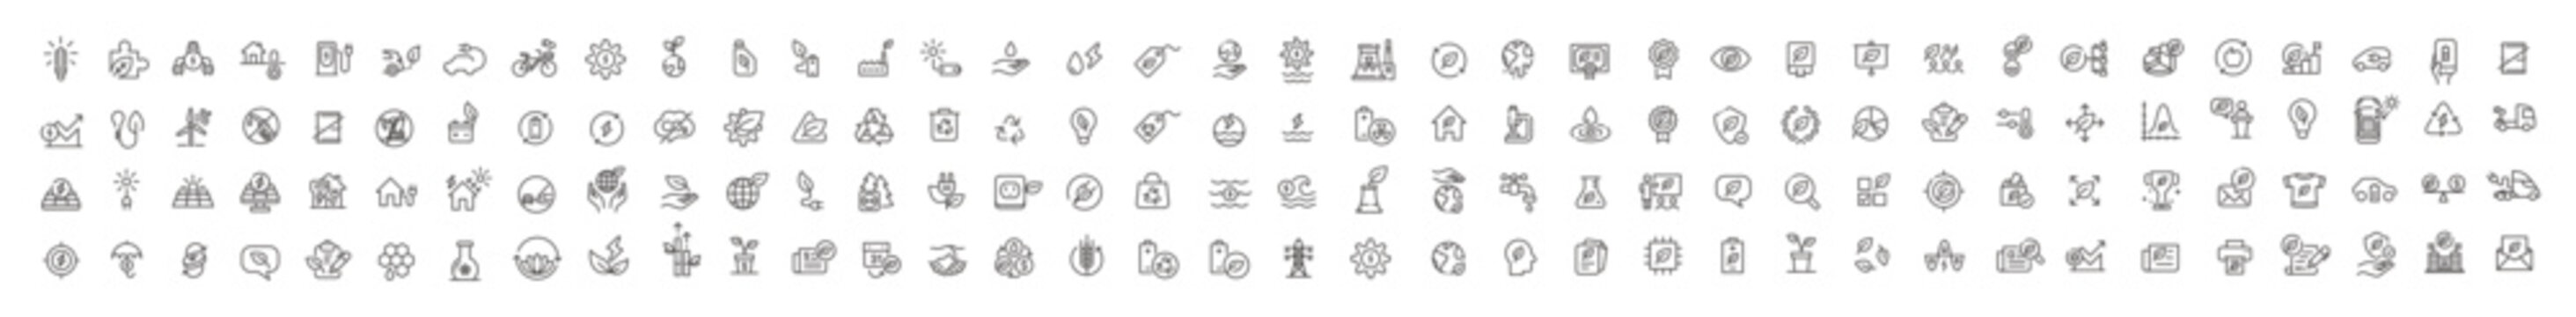 A set of vector icons on the theme of renewable energy, including symbols for solar power, wind turbines, hydroelectric dams, geothermal sources, biomass plants, energy efficiency, electric vehicles, 